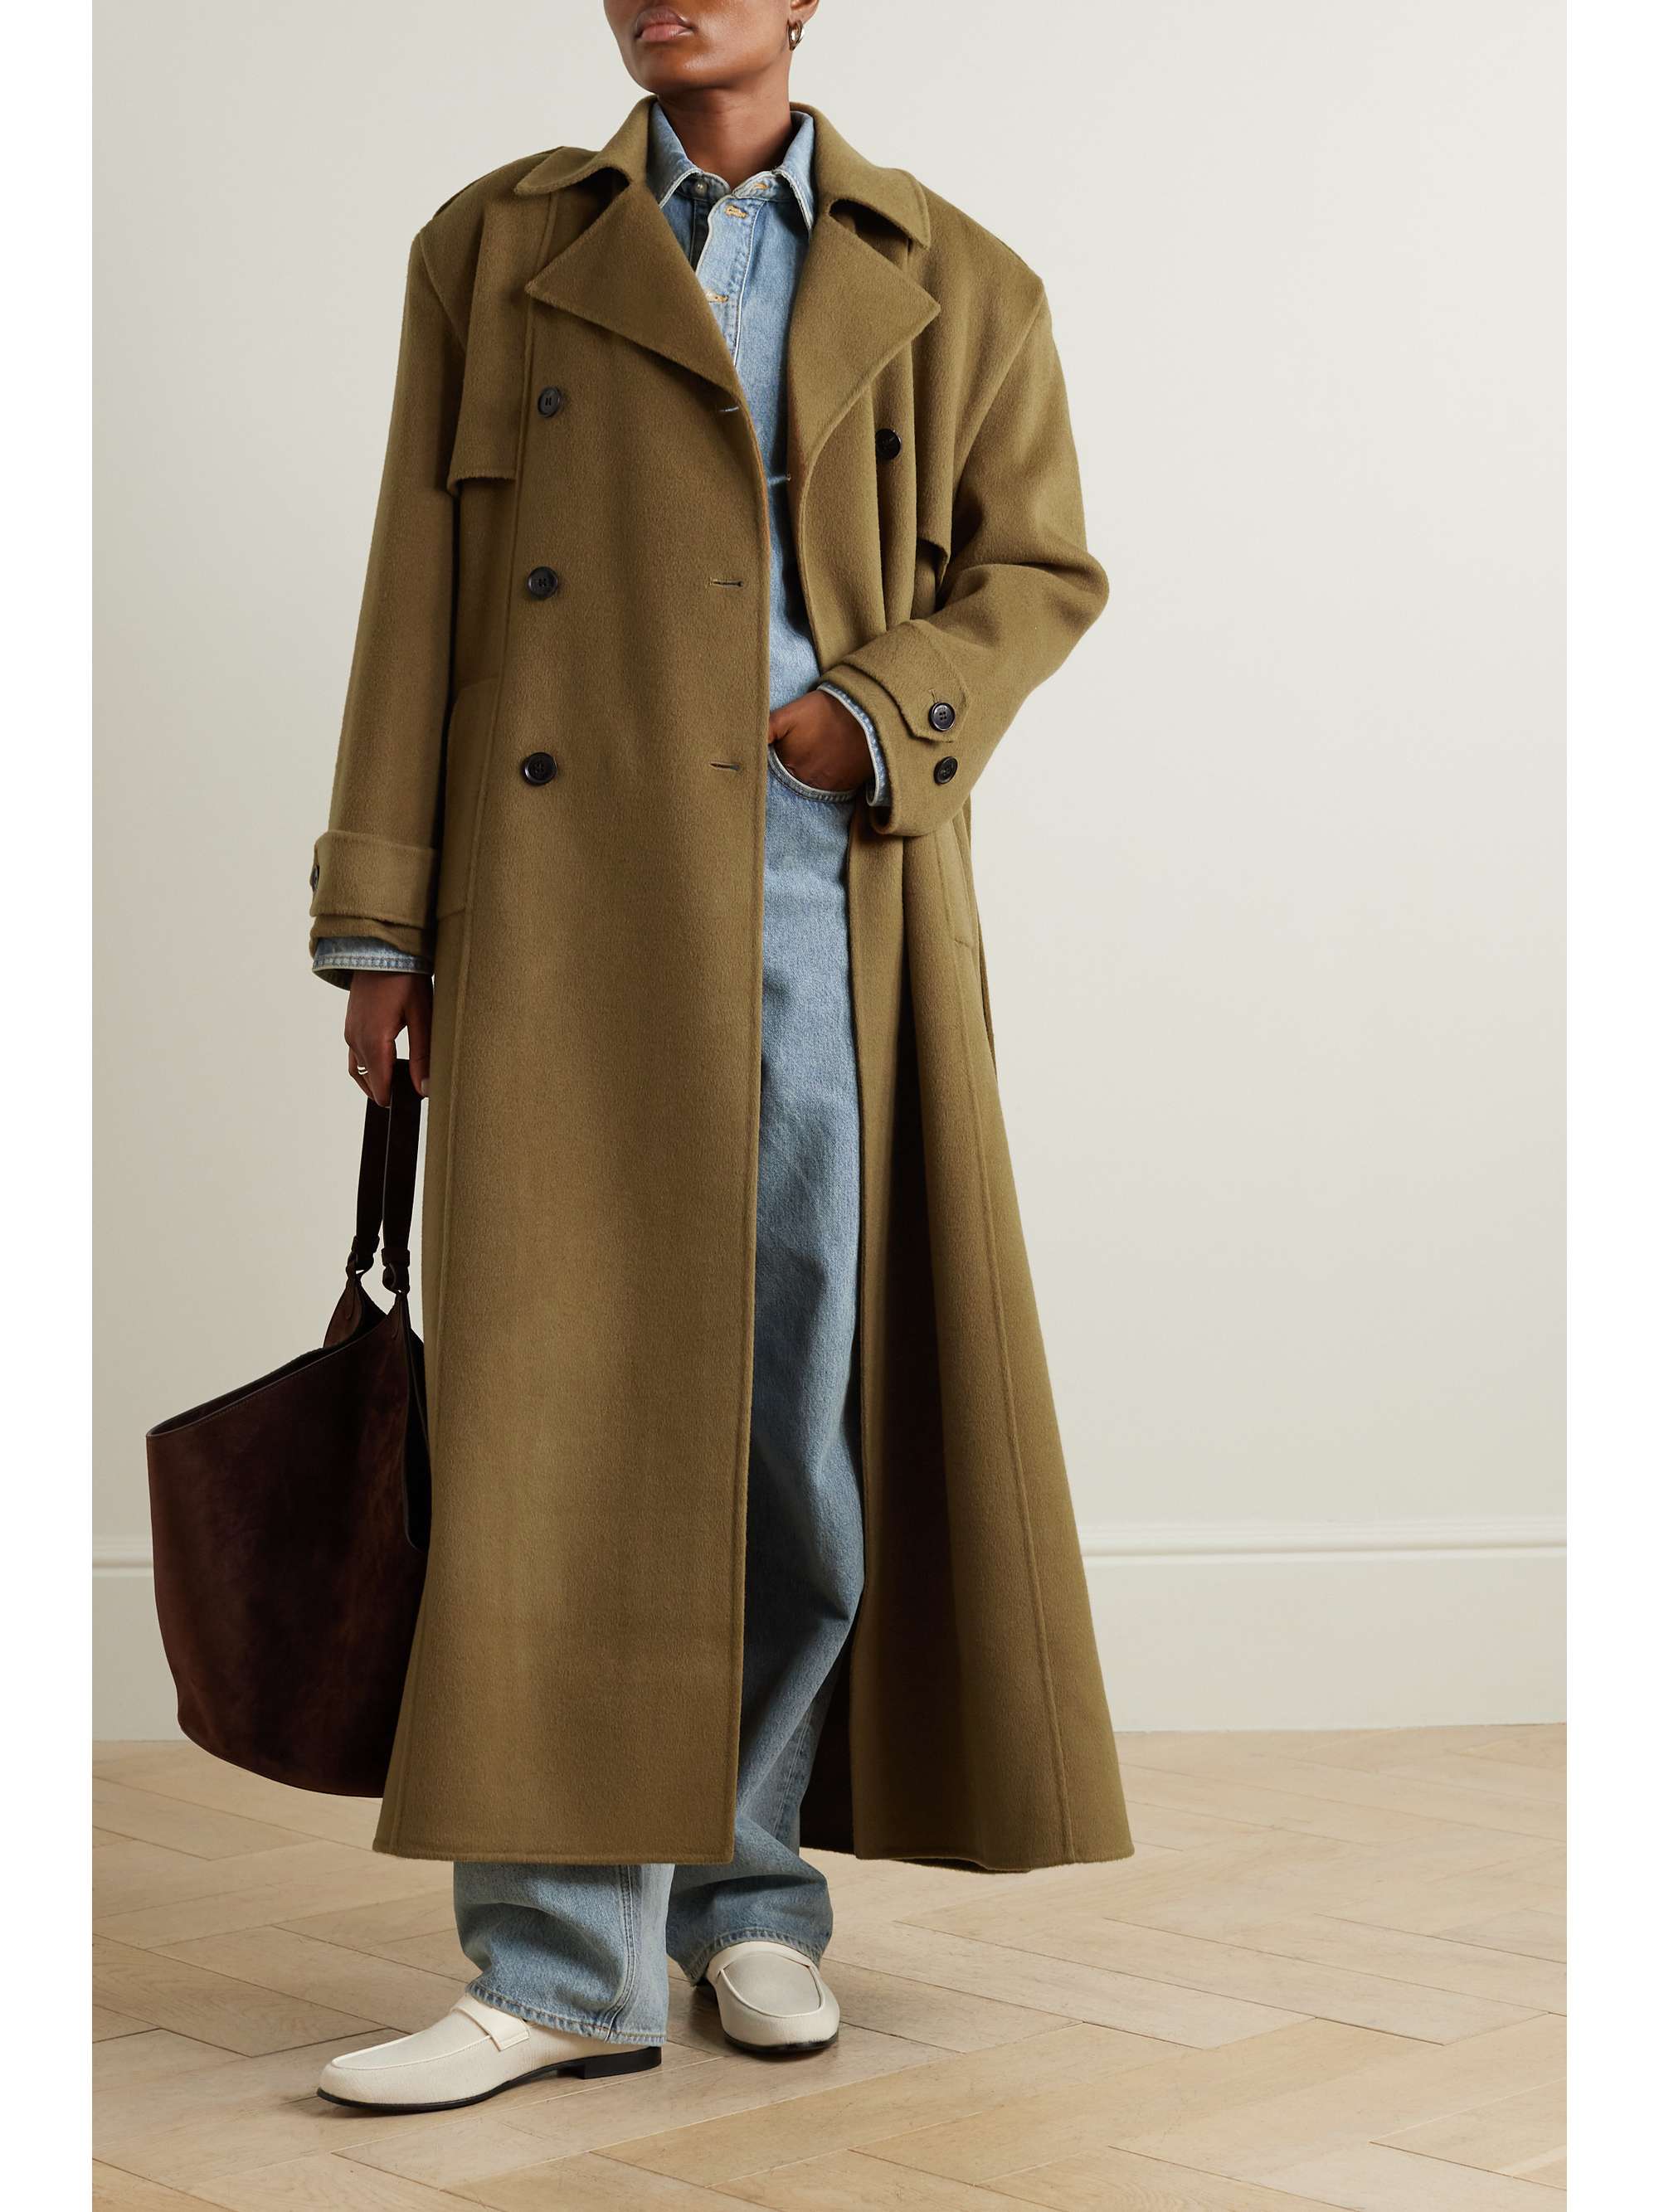 The Frankie Shop + Nikola Oversized Wool and Cashmere-Blend Trench Coat